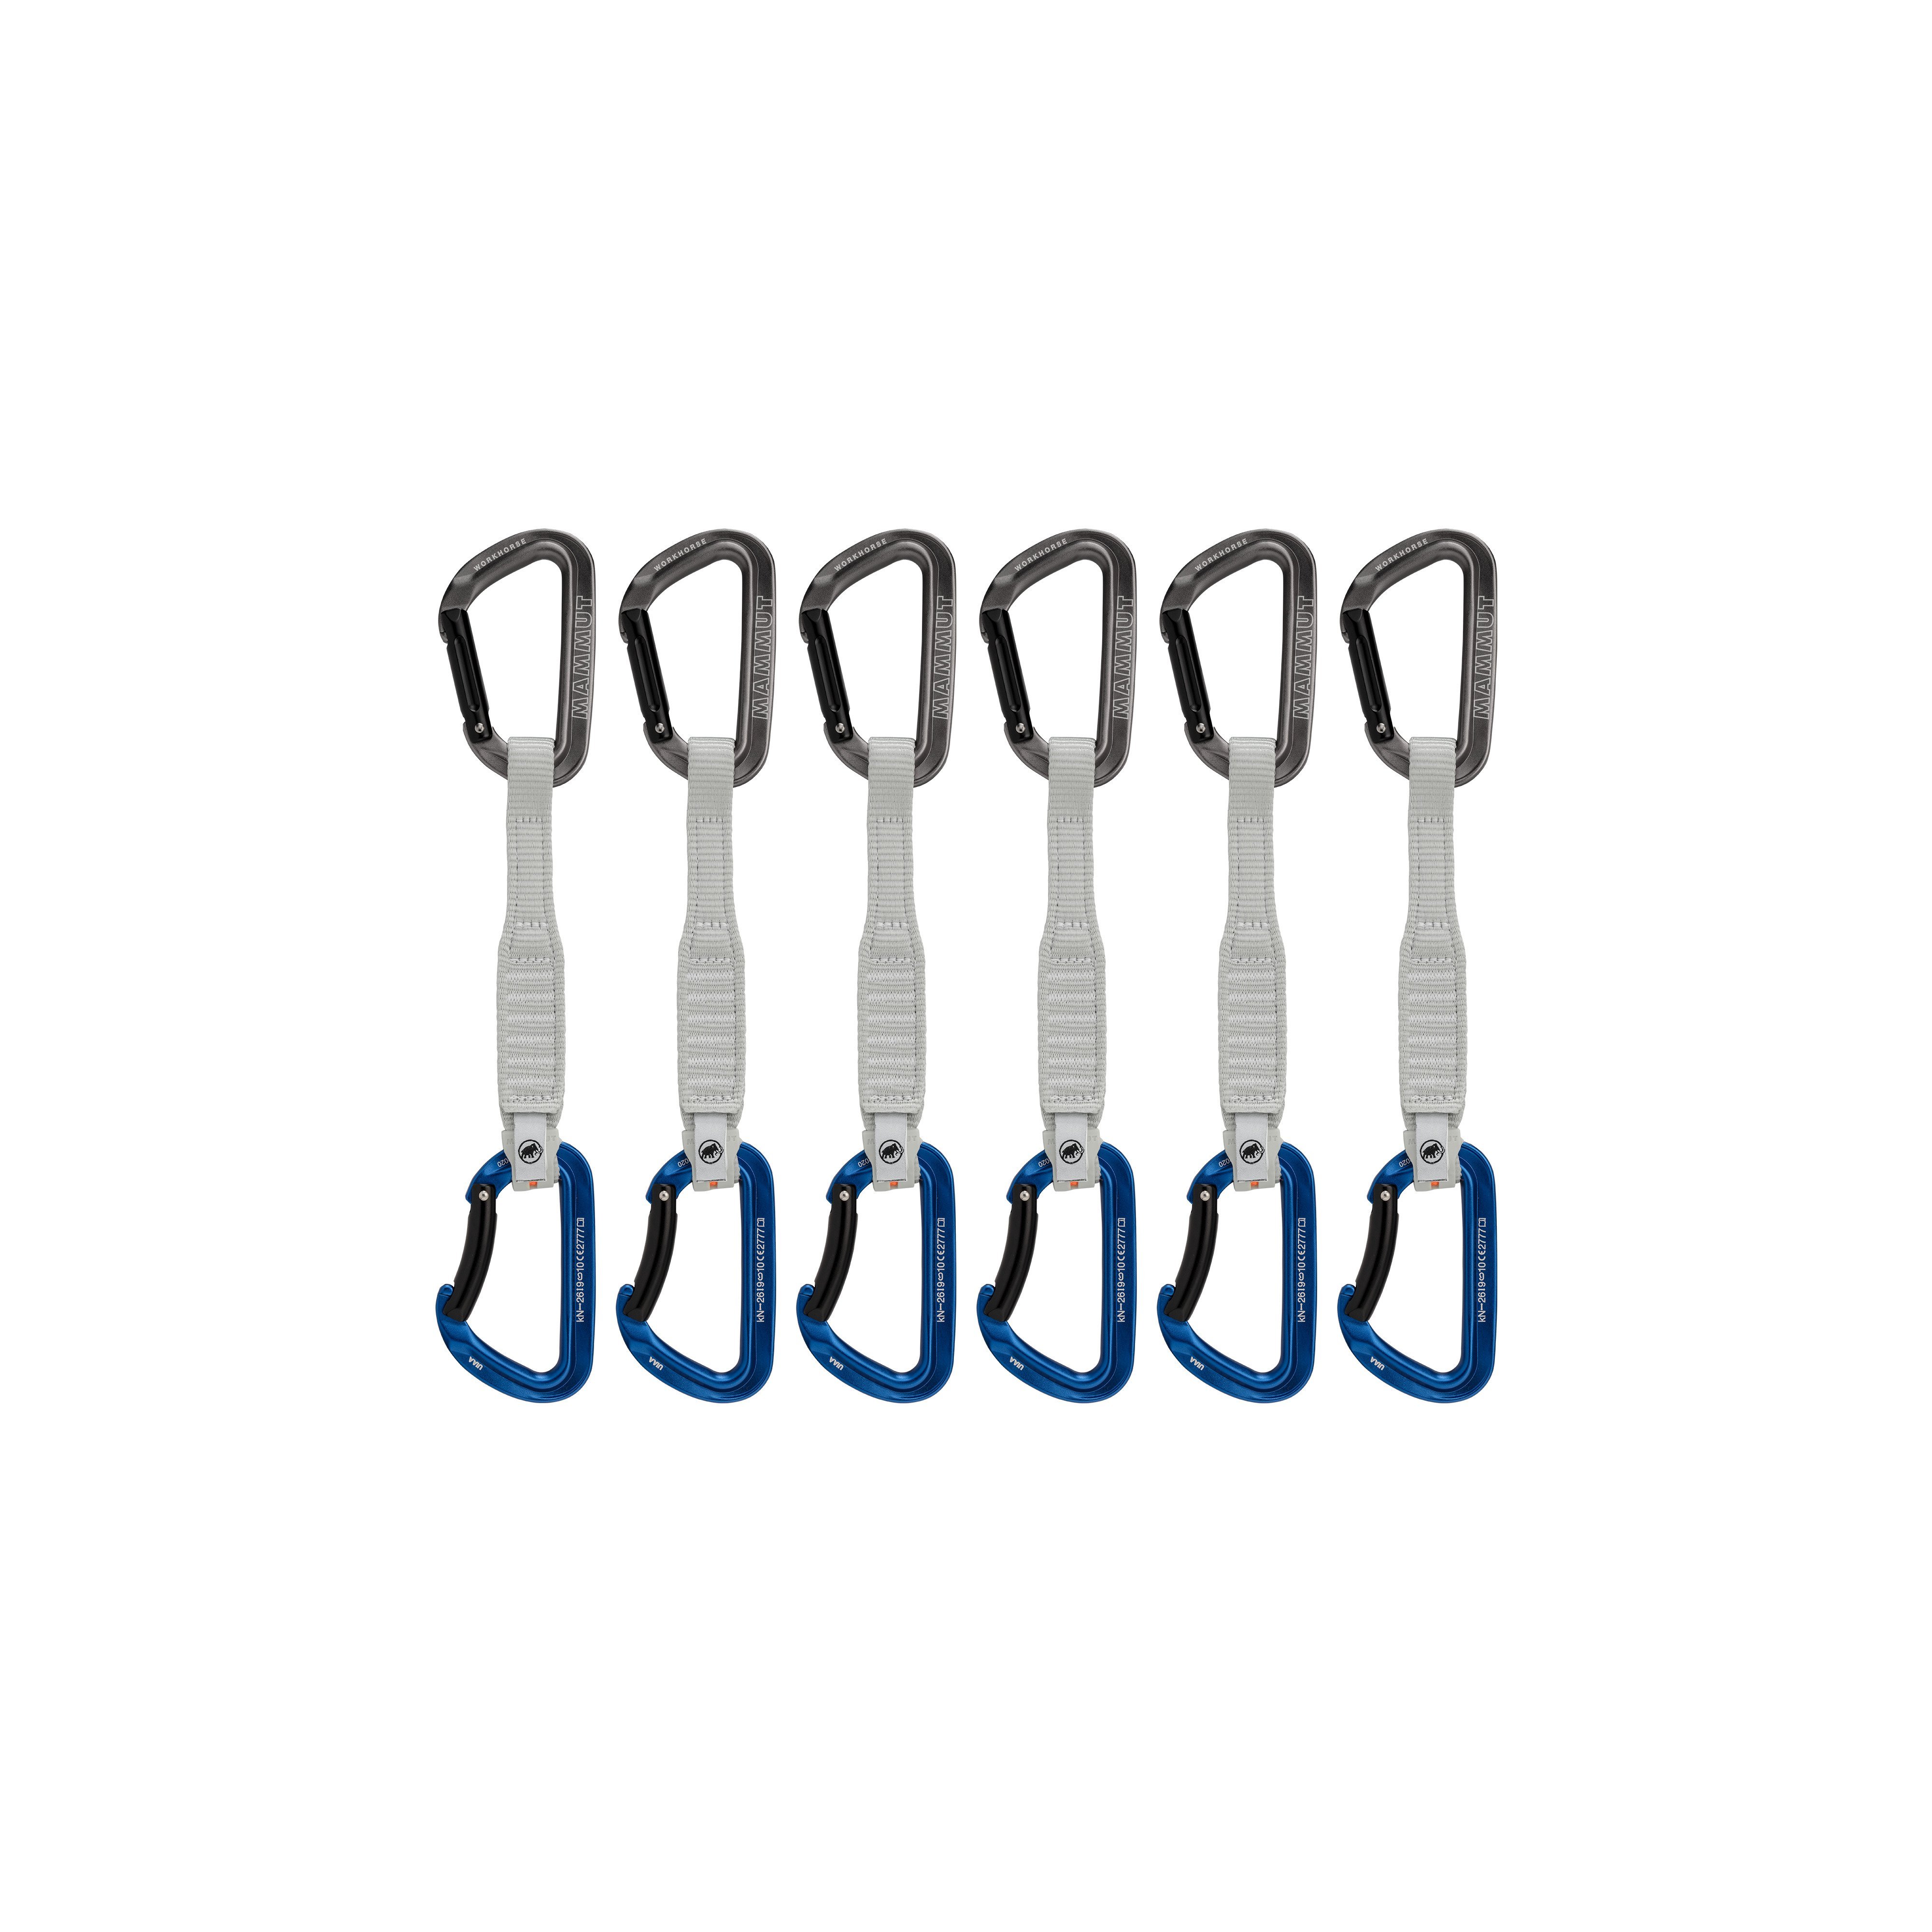 Workhorse Keylock 17 cm 6-Pack Quickdraws - grey-blue, 17 cm product image